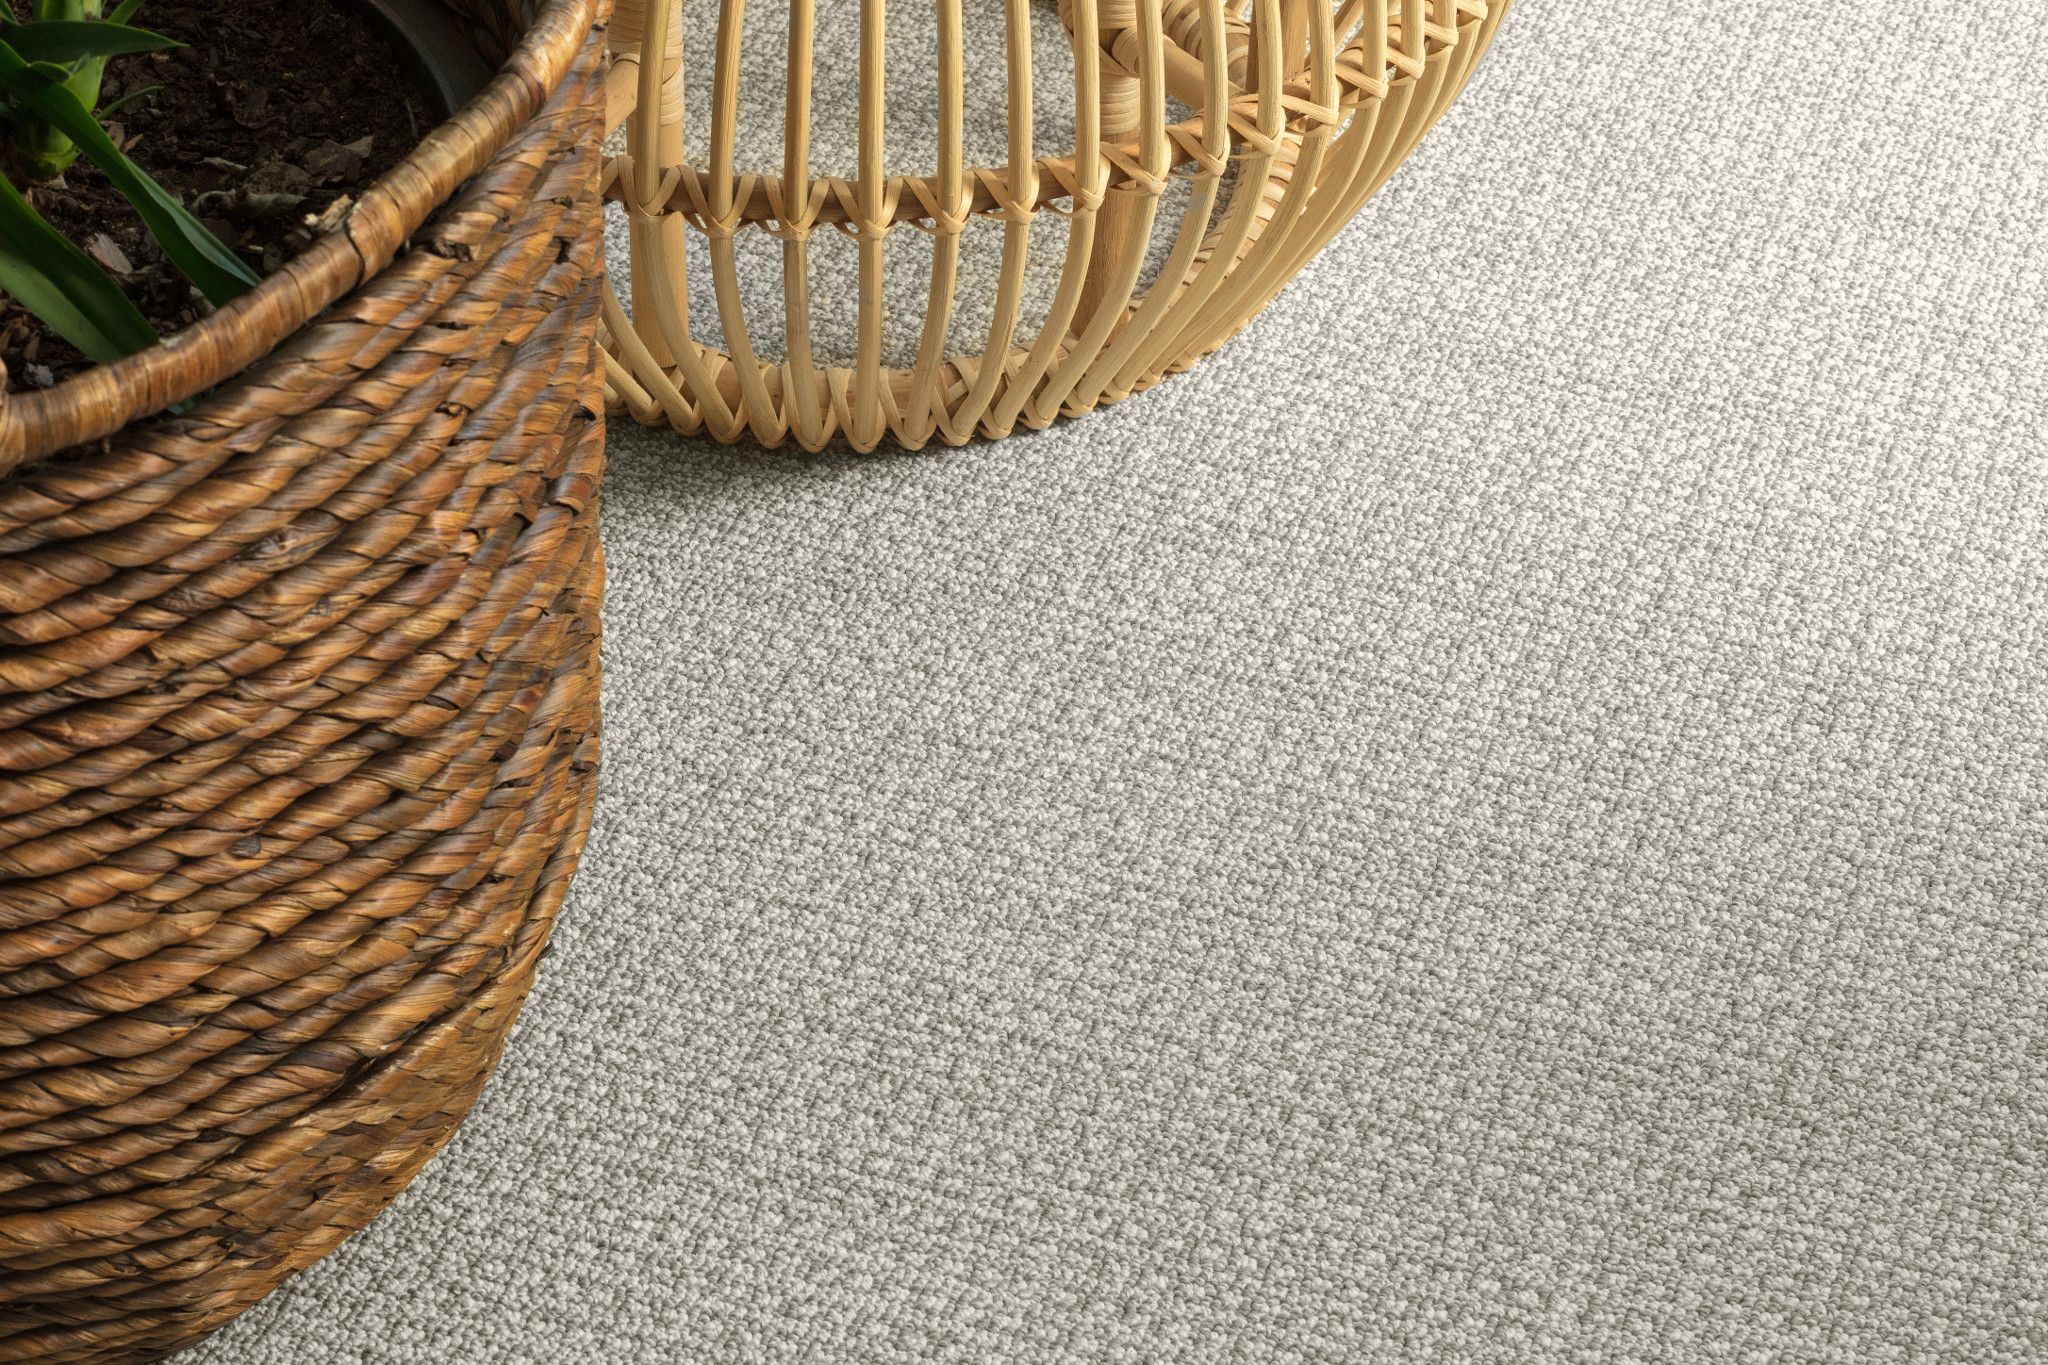 Victorious Plus Pad - St. Jude (Extends Shaw Carpet Warranty 10 Years) by  Shaw Carpet